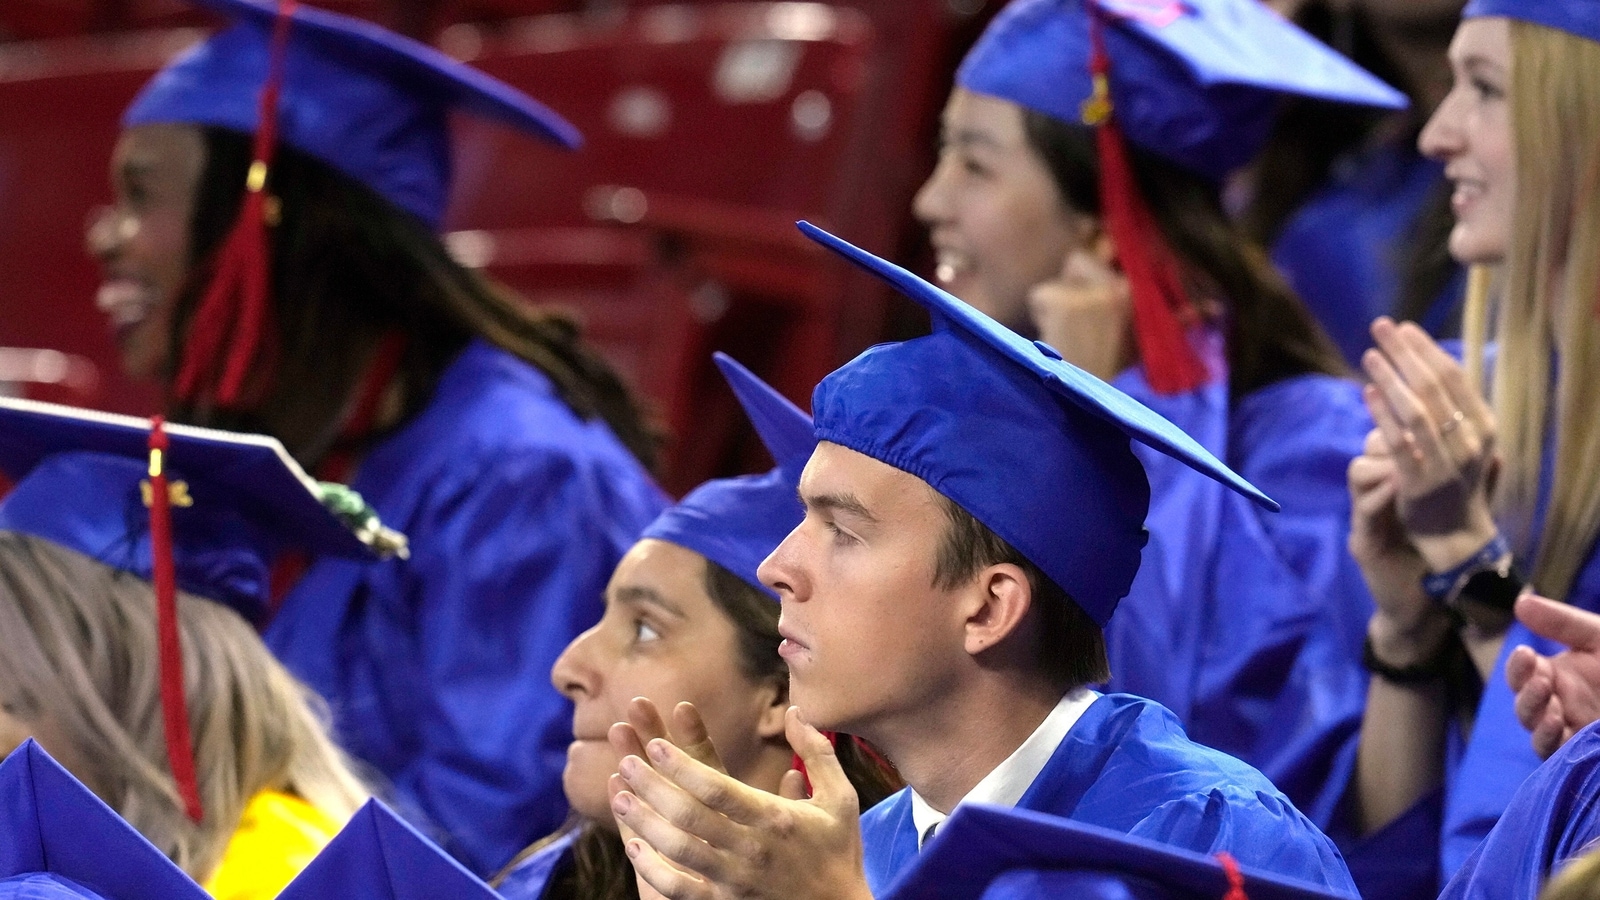 Best towns for new college grads in US ranked, based on city and metro factors